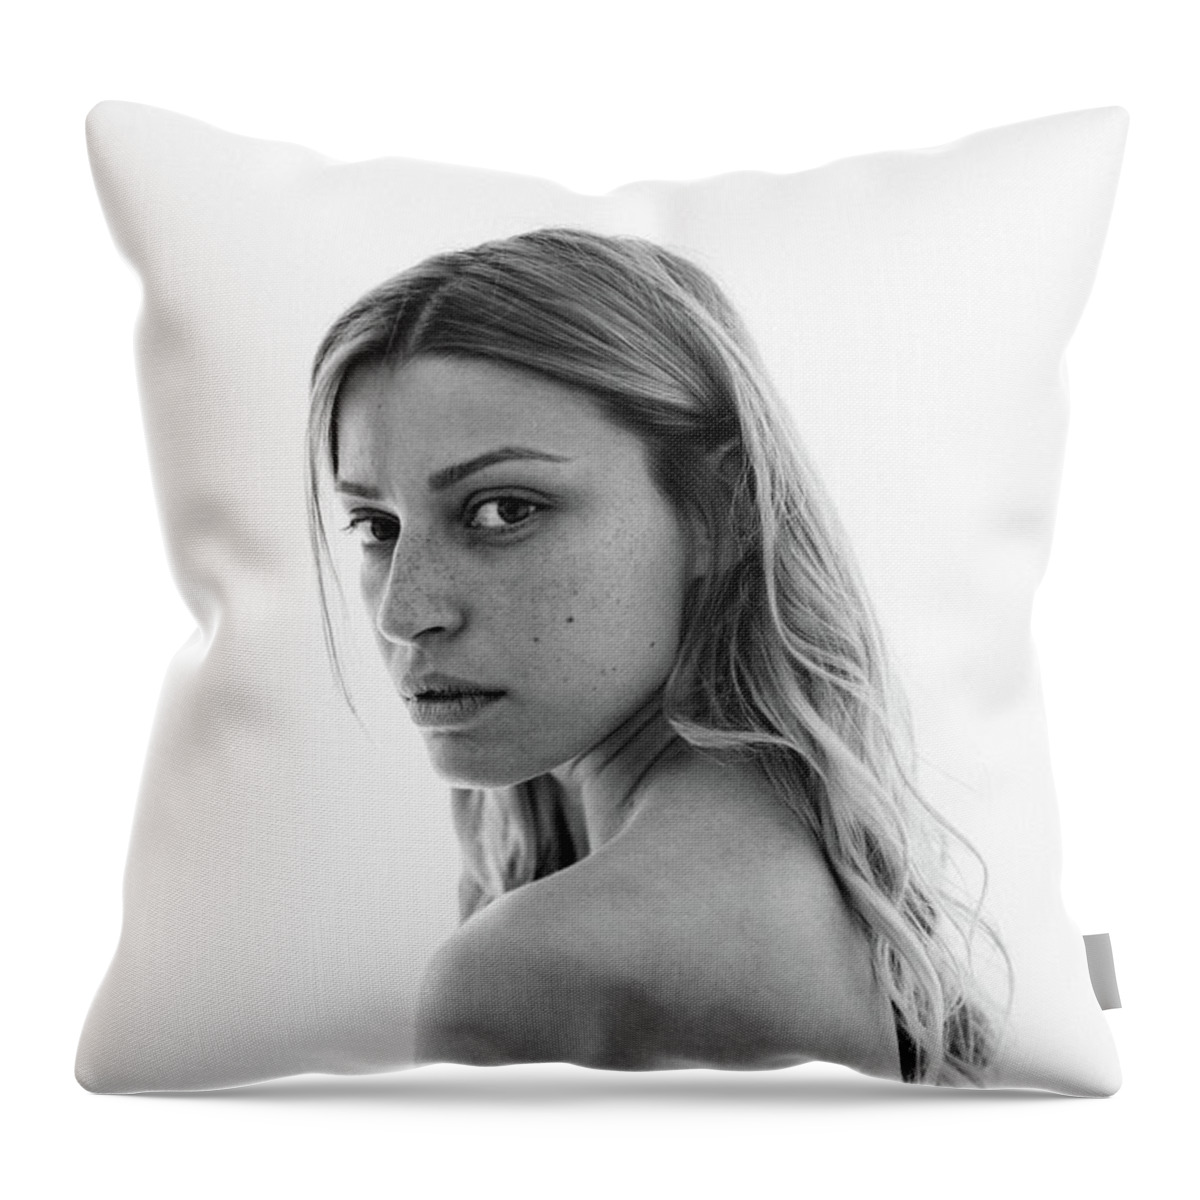 People Throw Pillow featuring the photograph Black And White Portrait Of A Young by Aleksandarnakic